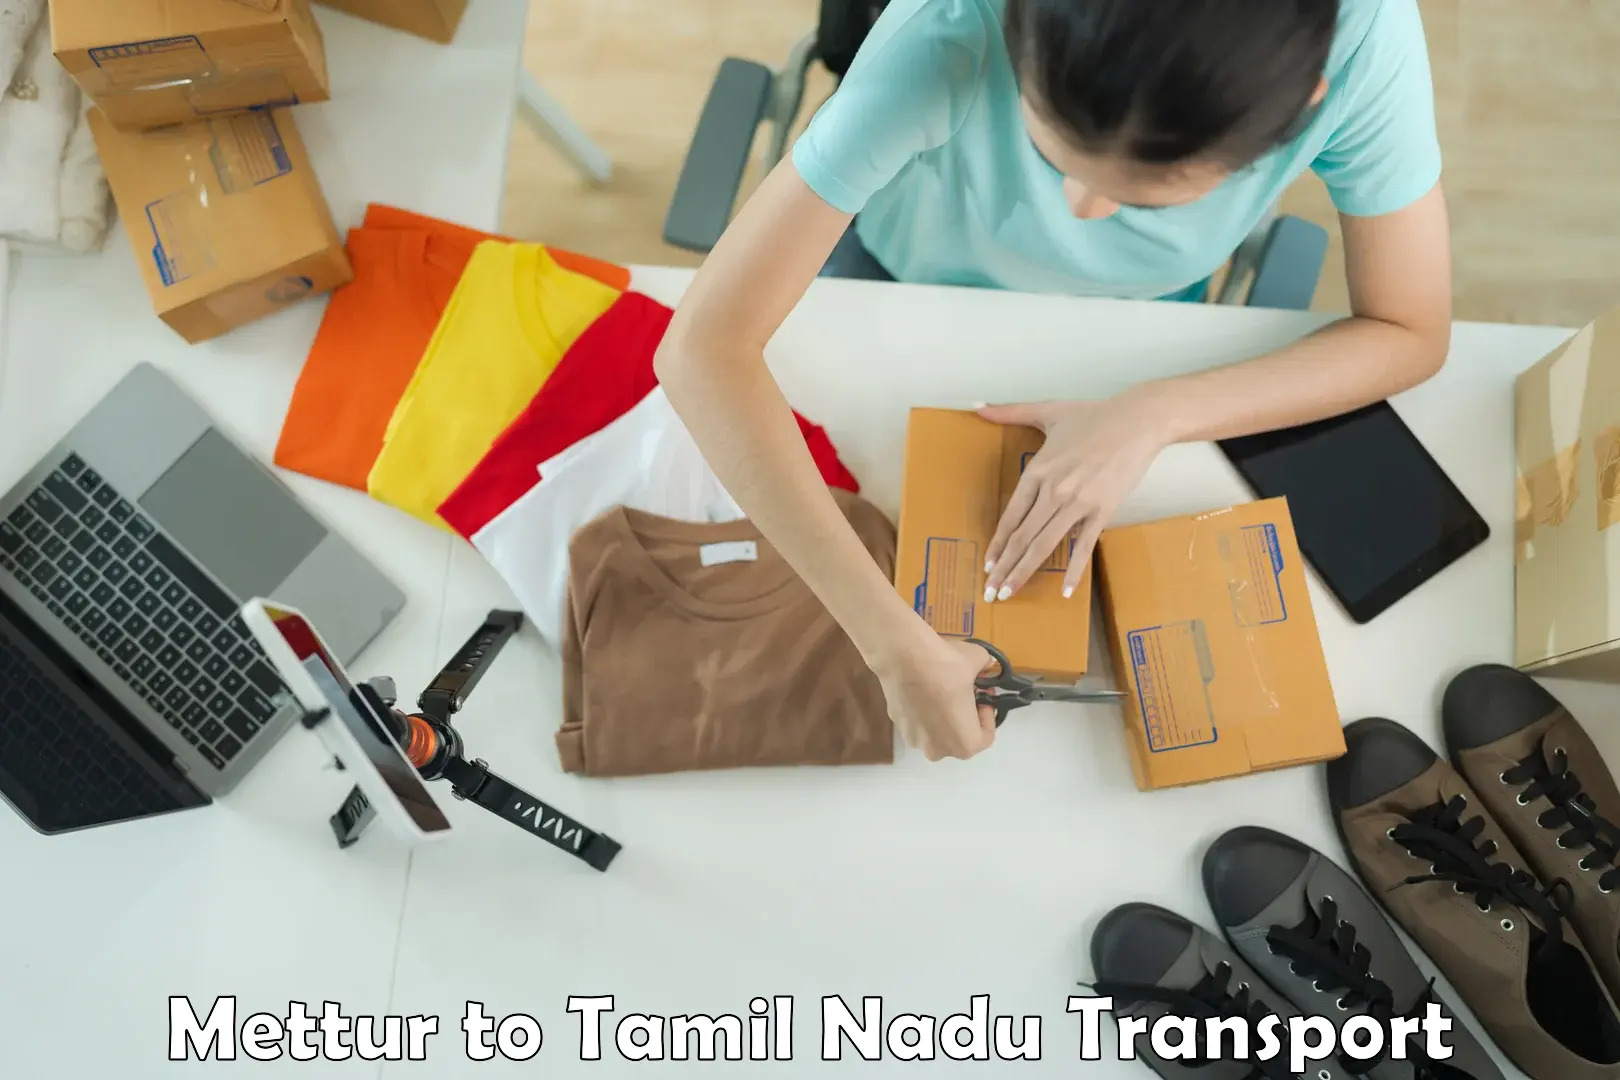 Express transport services Mettur to Vellore Institute of Technology